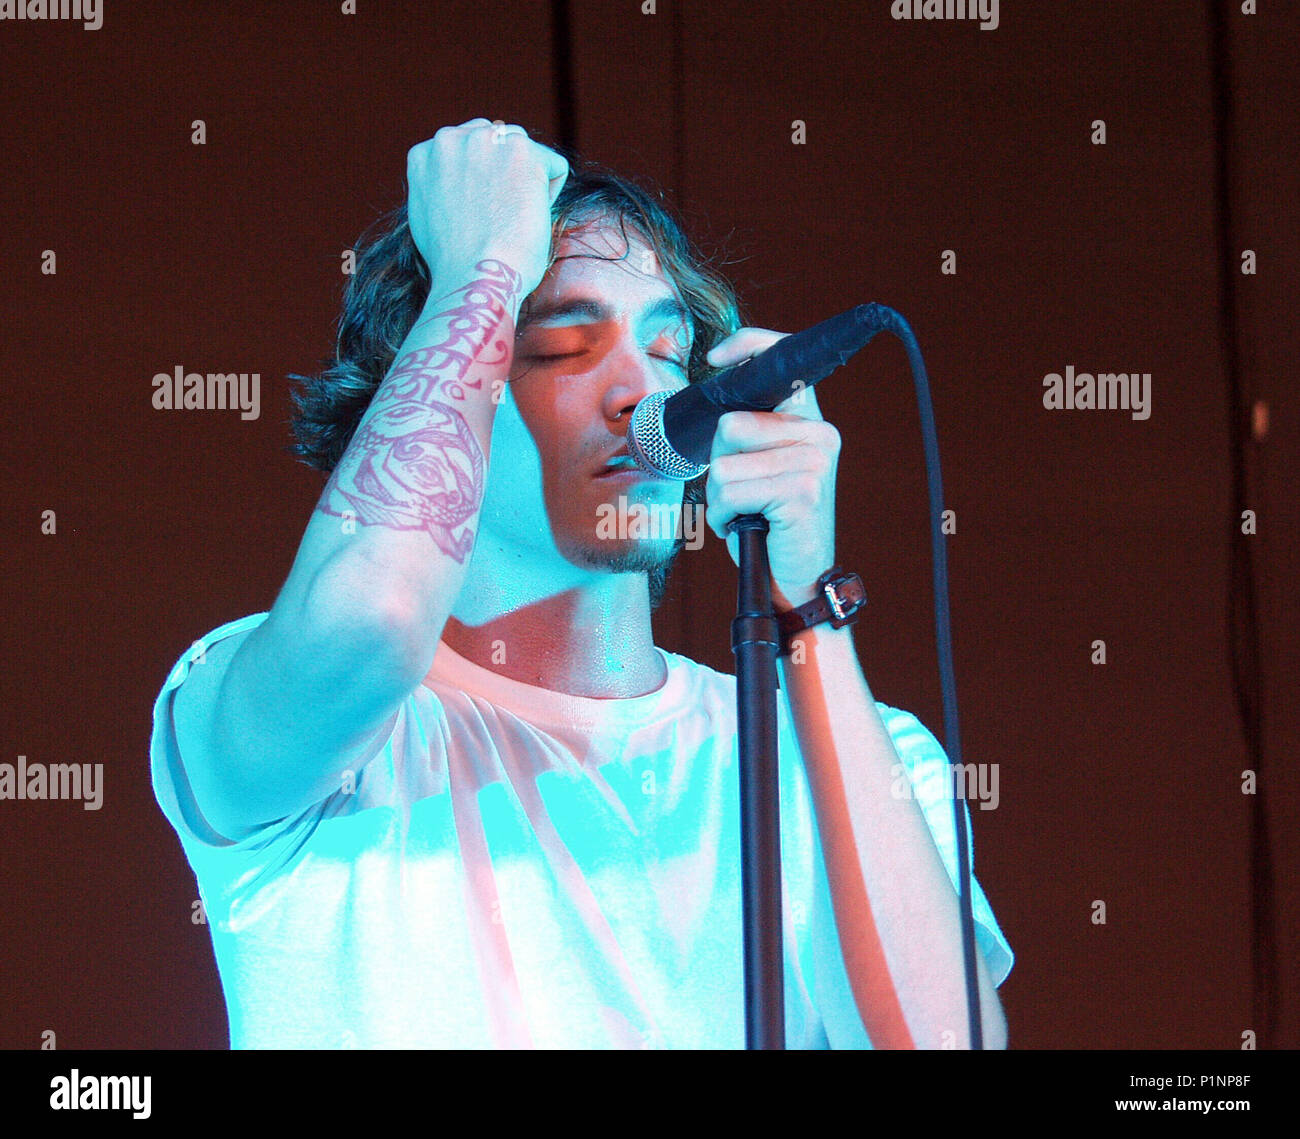 ATLANTA, GA - July 11: Brandon Boyd of Incubus performs during the very first stop of the AREA : ONE Festival at Lakewood Amphitheatre in Atlanta, Georgia on July 11, 2001. CREDIT: Chris McKay / MediaPunch Stock Photo